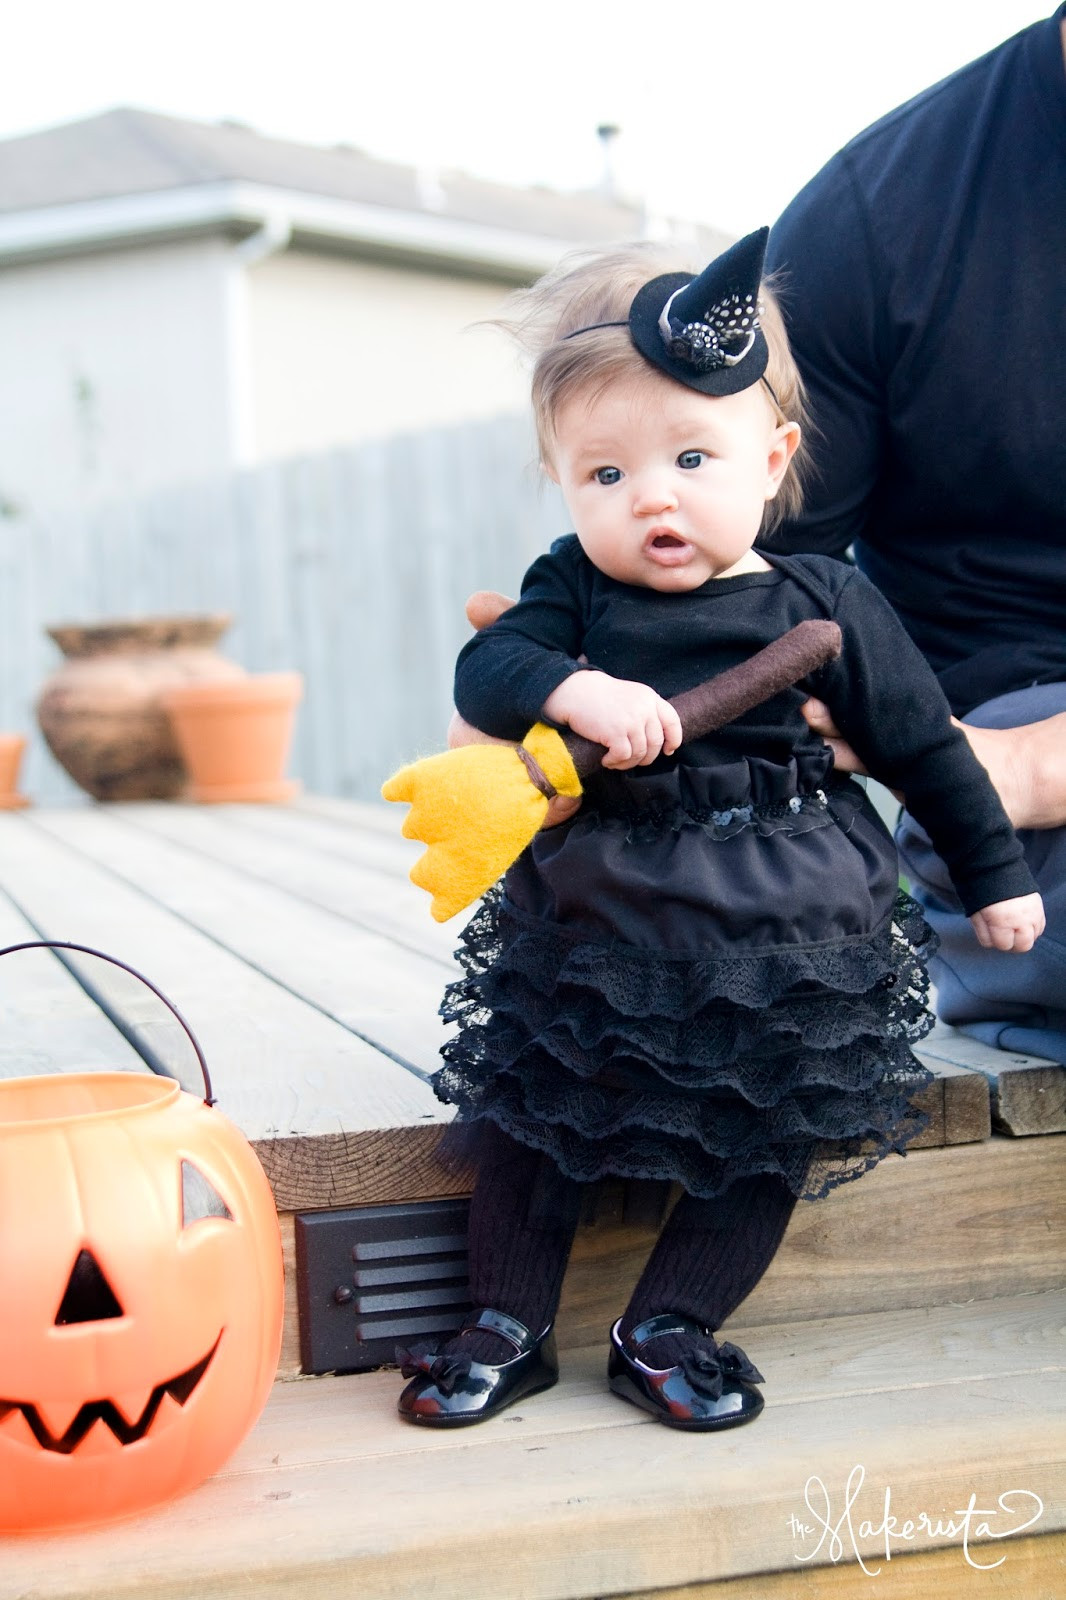 Diy Baby Girl Costumes
 The Makerista To Make or to Buy Halloween Costumes